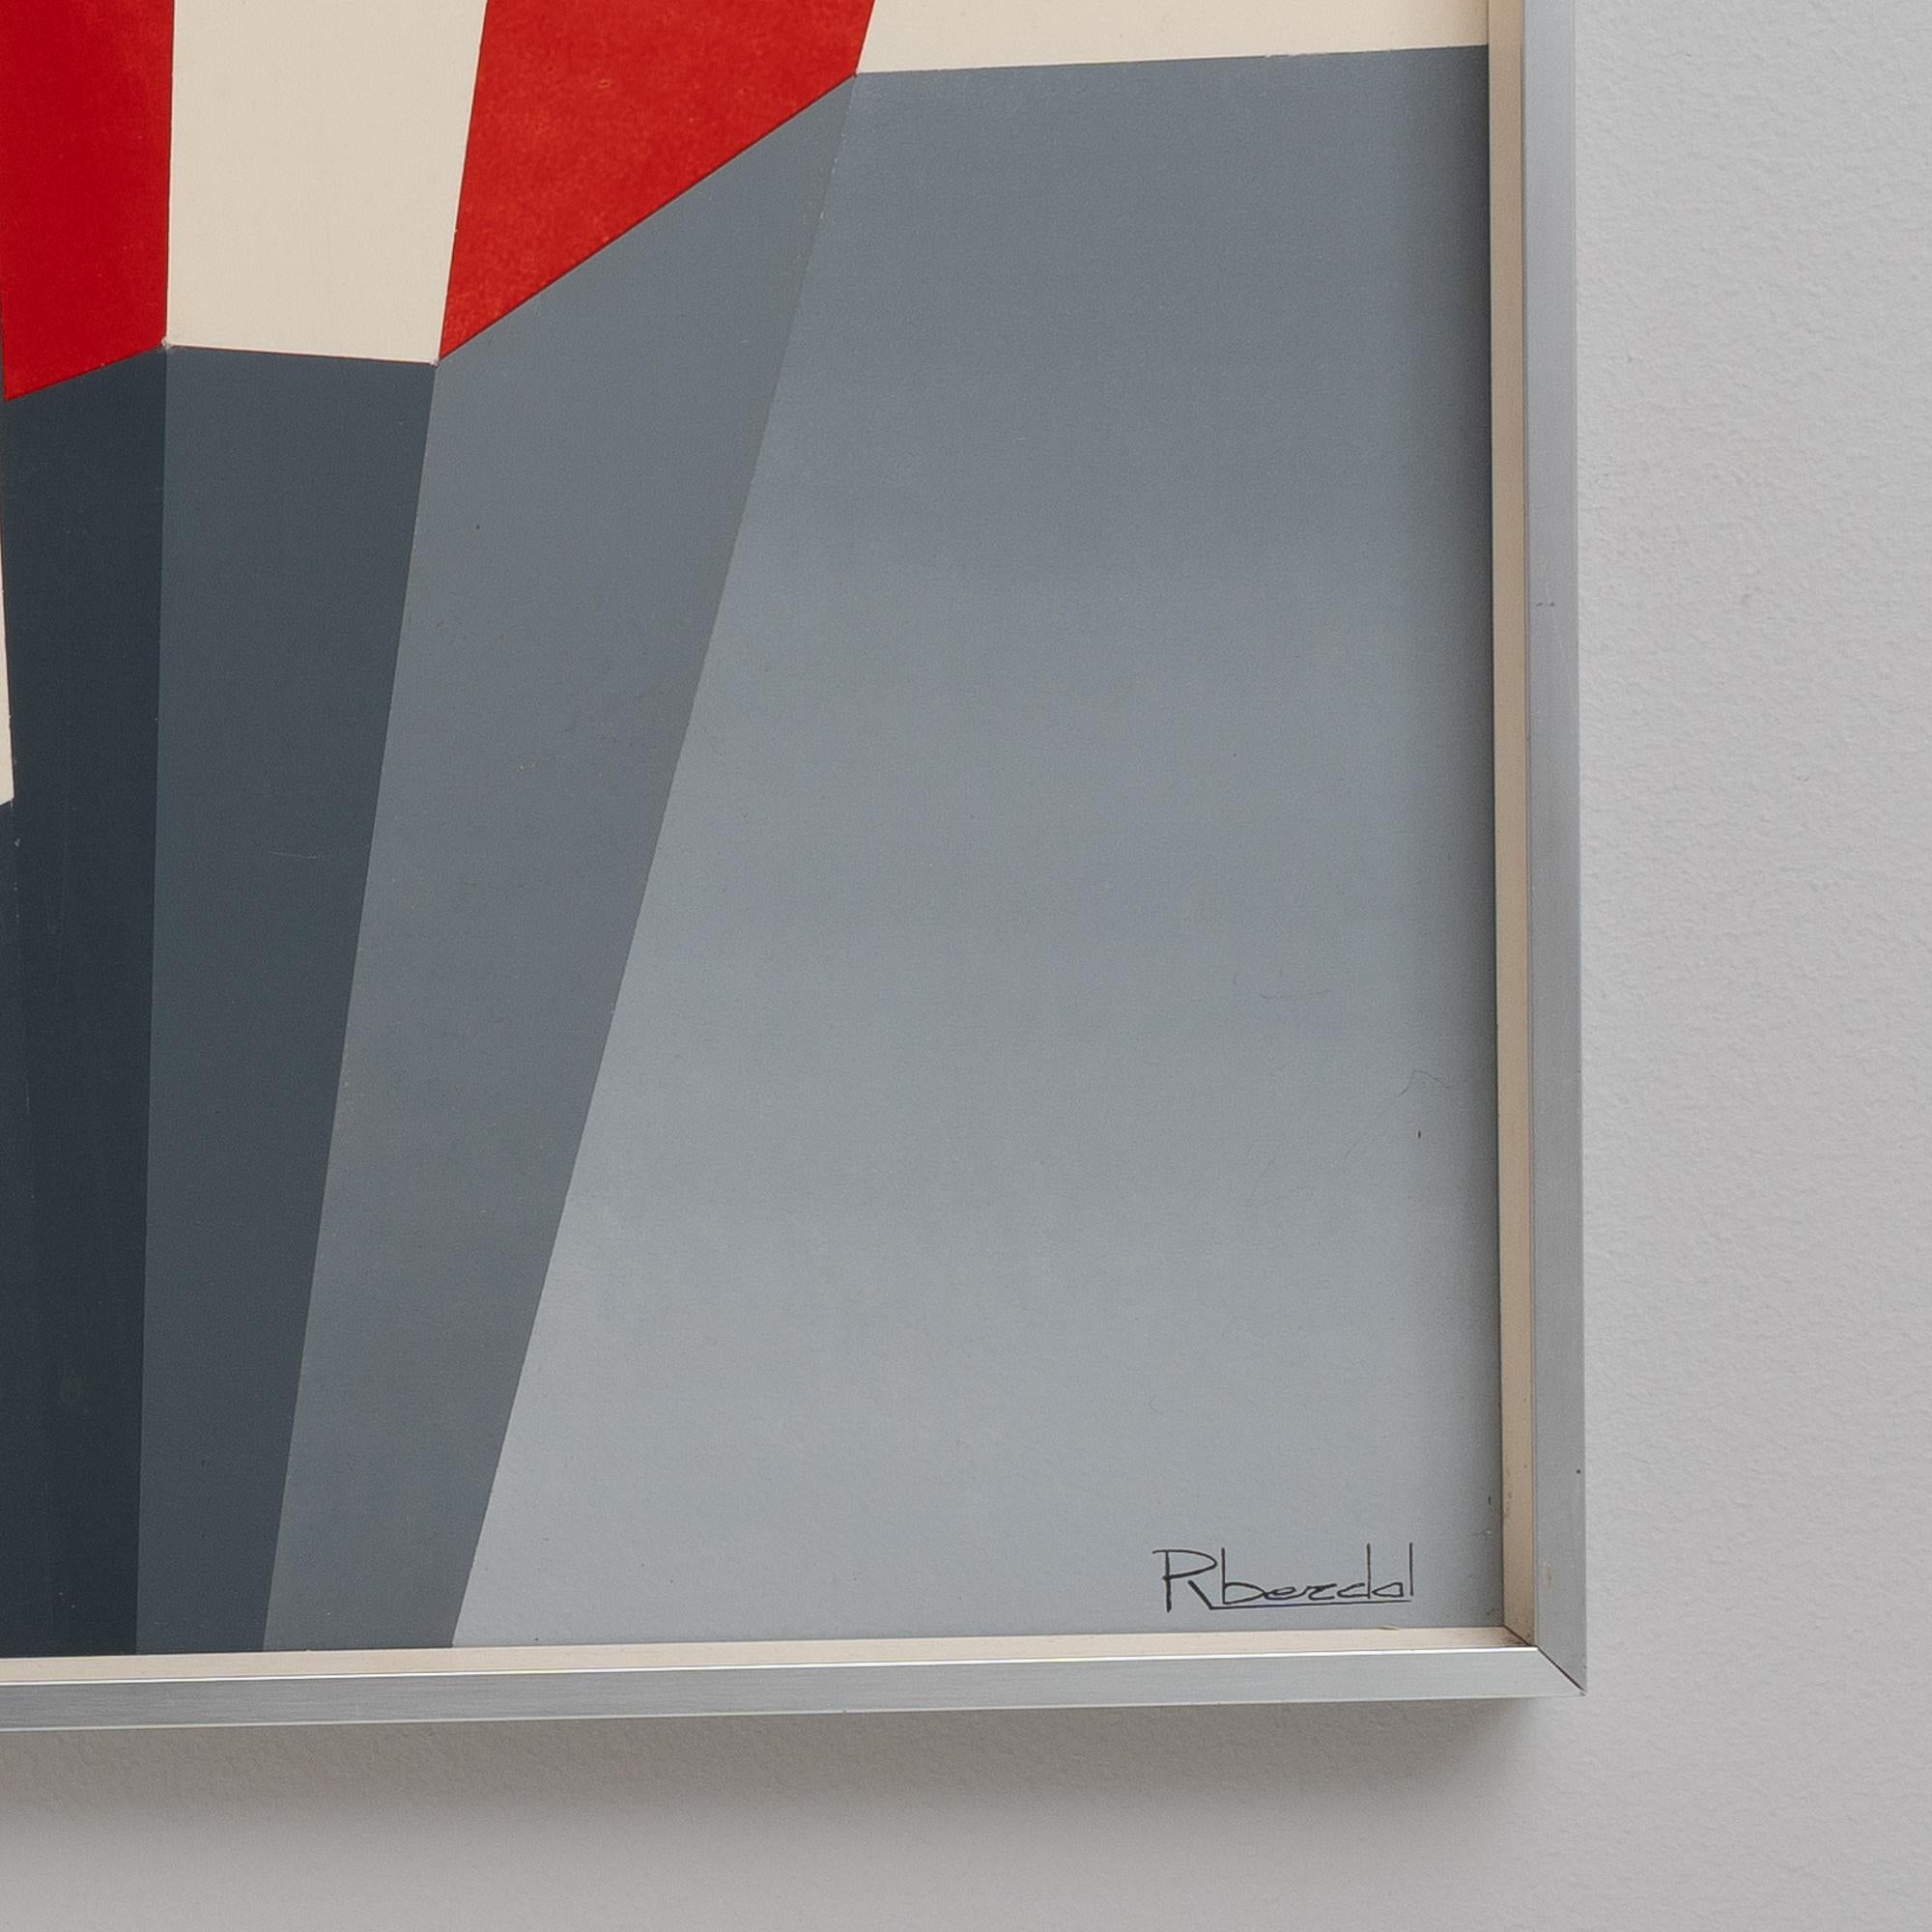 This captivating 20th Century artwork by Rene Berdal stands as a striking example of Belgian modernism. The piece boasts bold, abstract shapes that cut sharply across a muted palette of greys, with red and cream accents that add a dramatic flair to